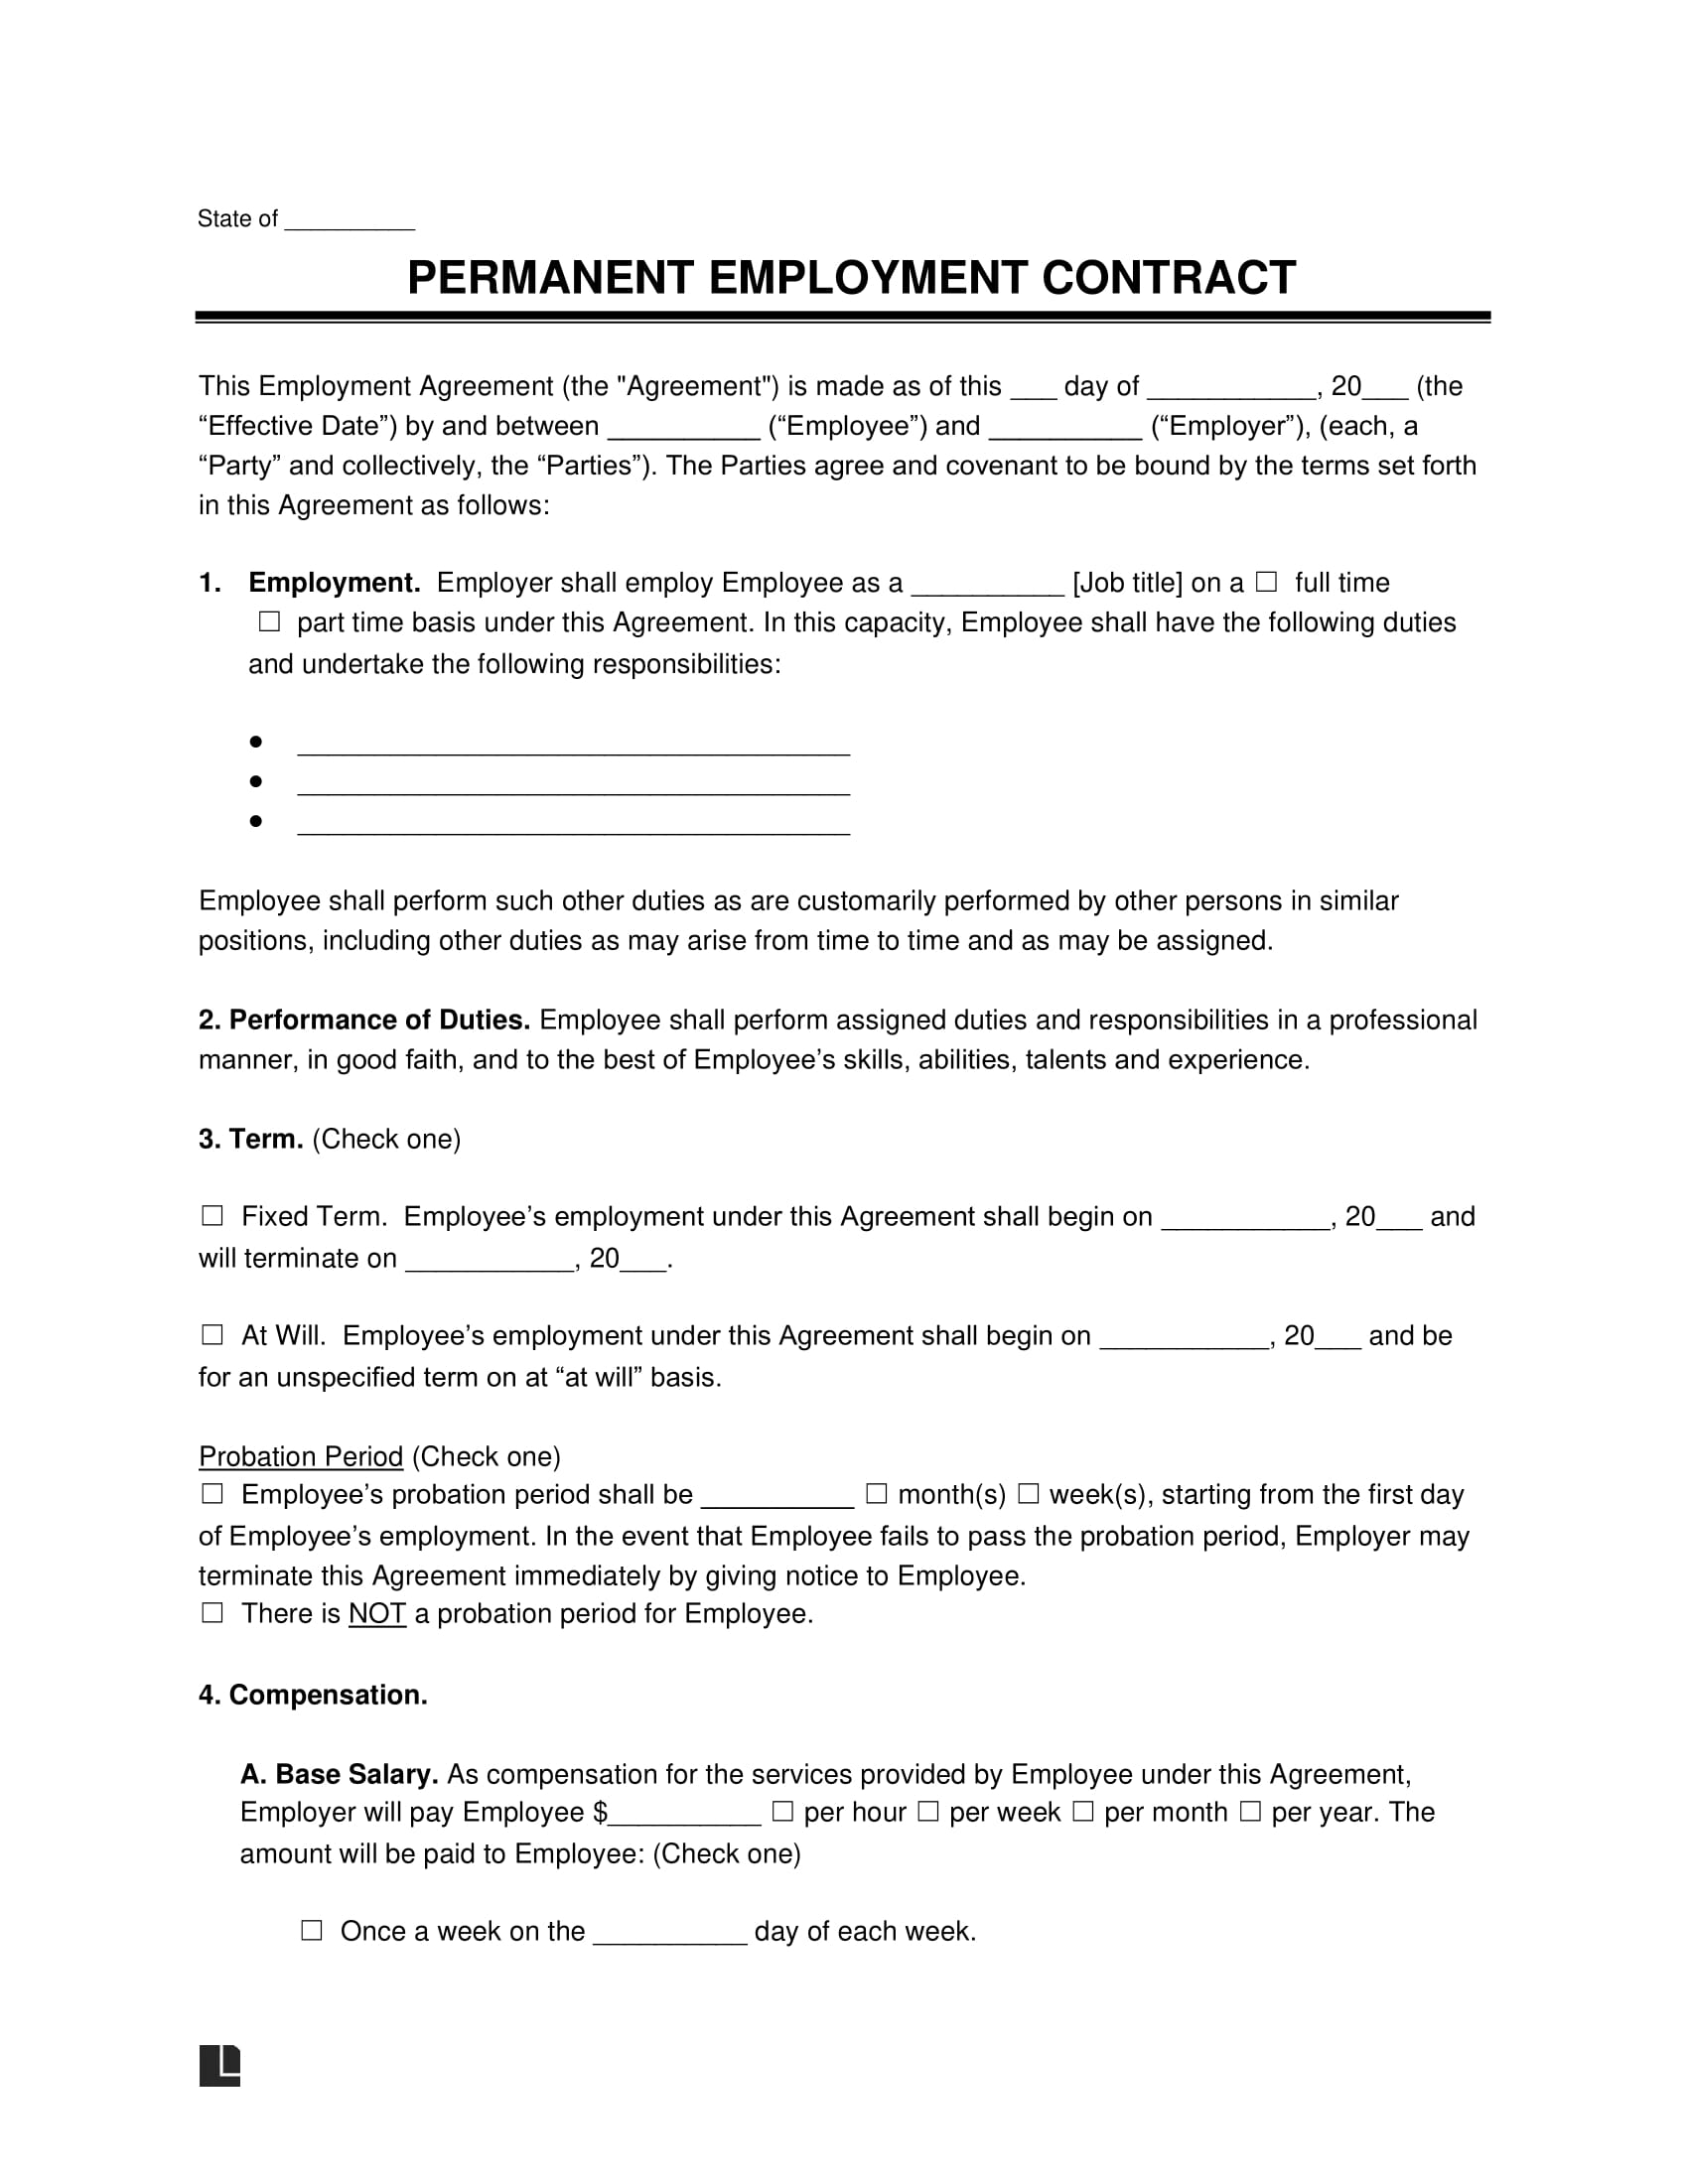 Free Permanent Employment Contract Template PDF Word